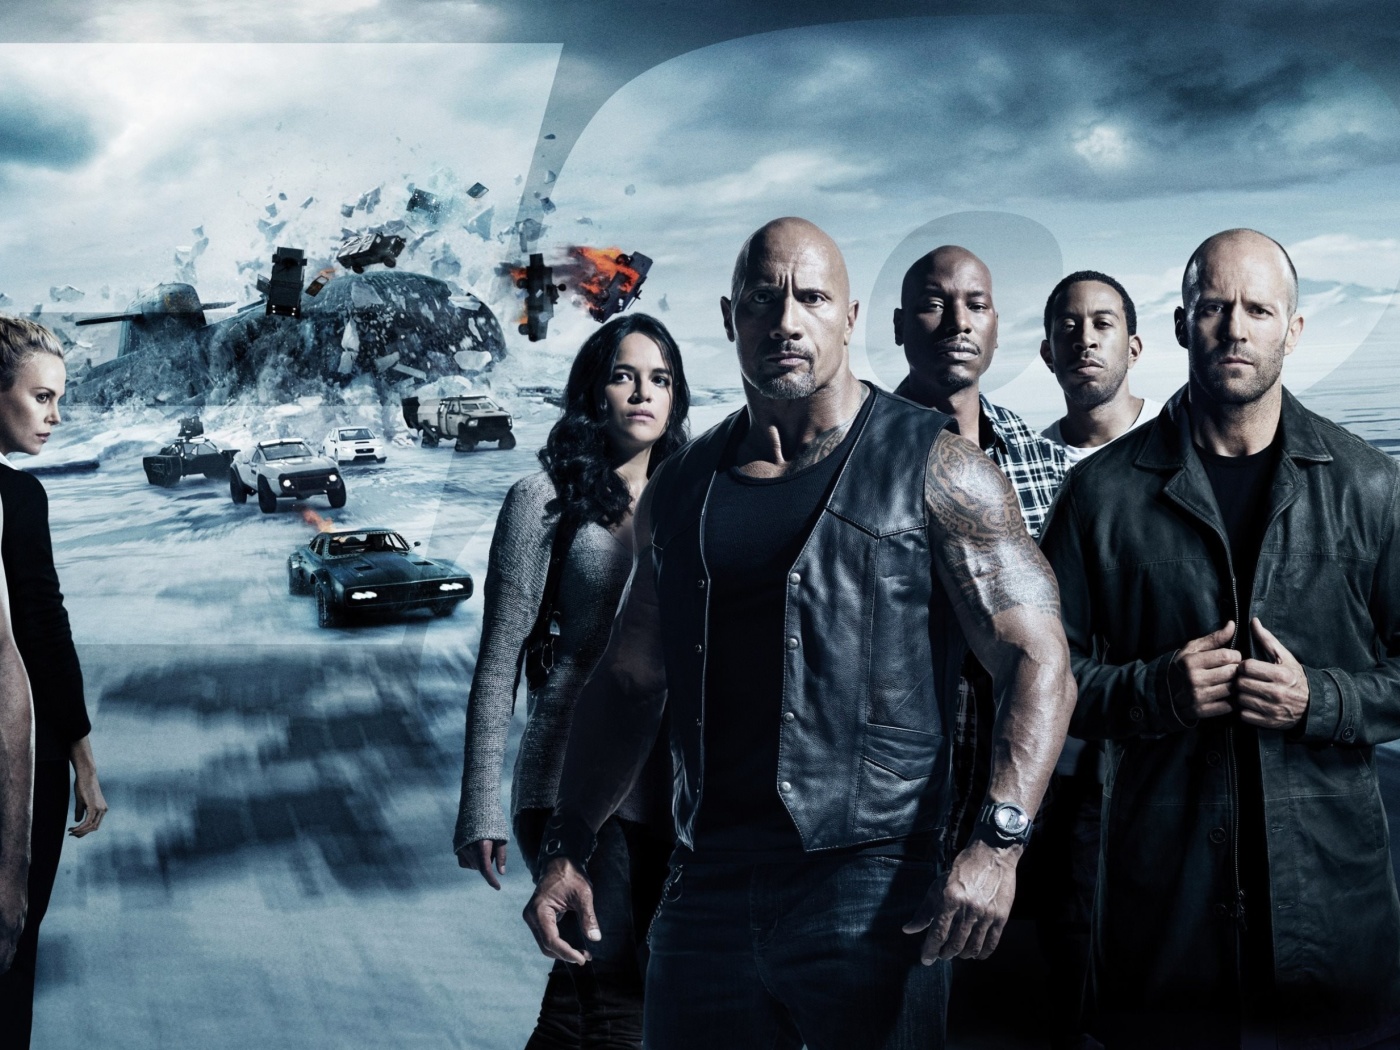 The Fate of the Furious with Vin Diesel, Dwayne Johnson, Charlize Theron screenshot #1 1400x1050